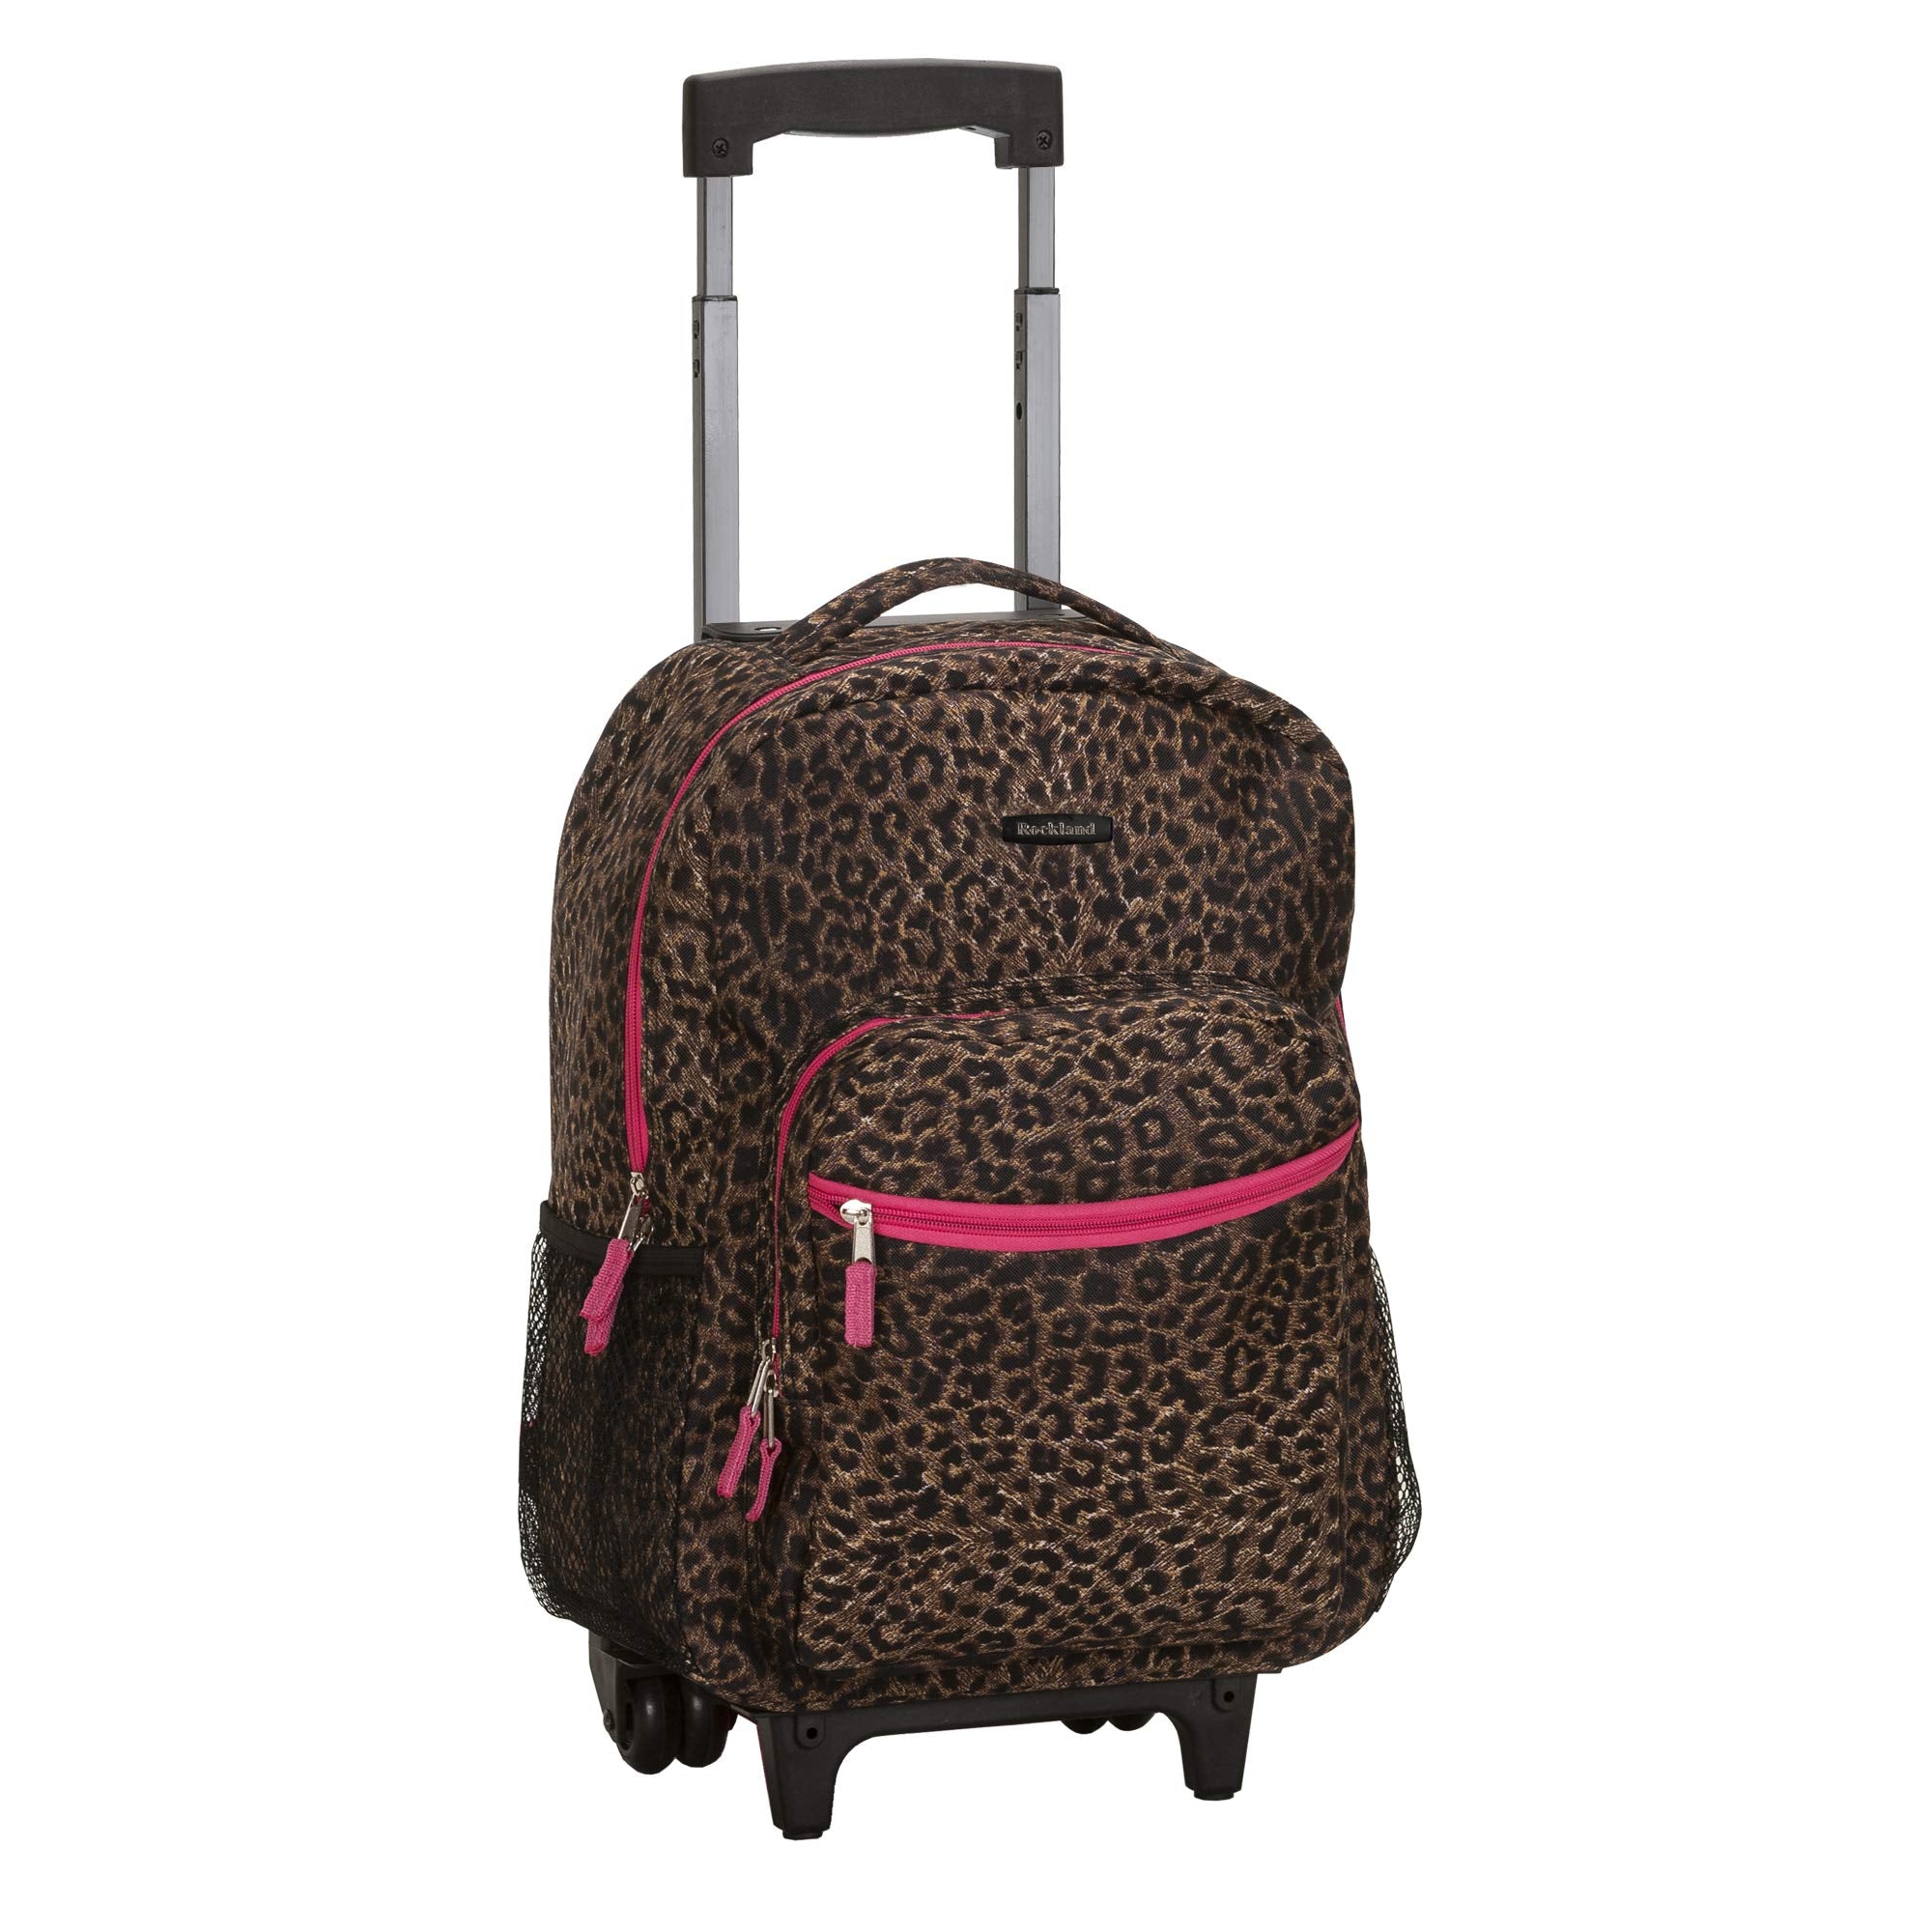 Baggallini Rolling Tote Carry-On Luggage - 17 - Cheetah/Black